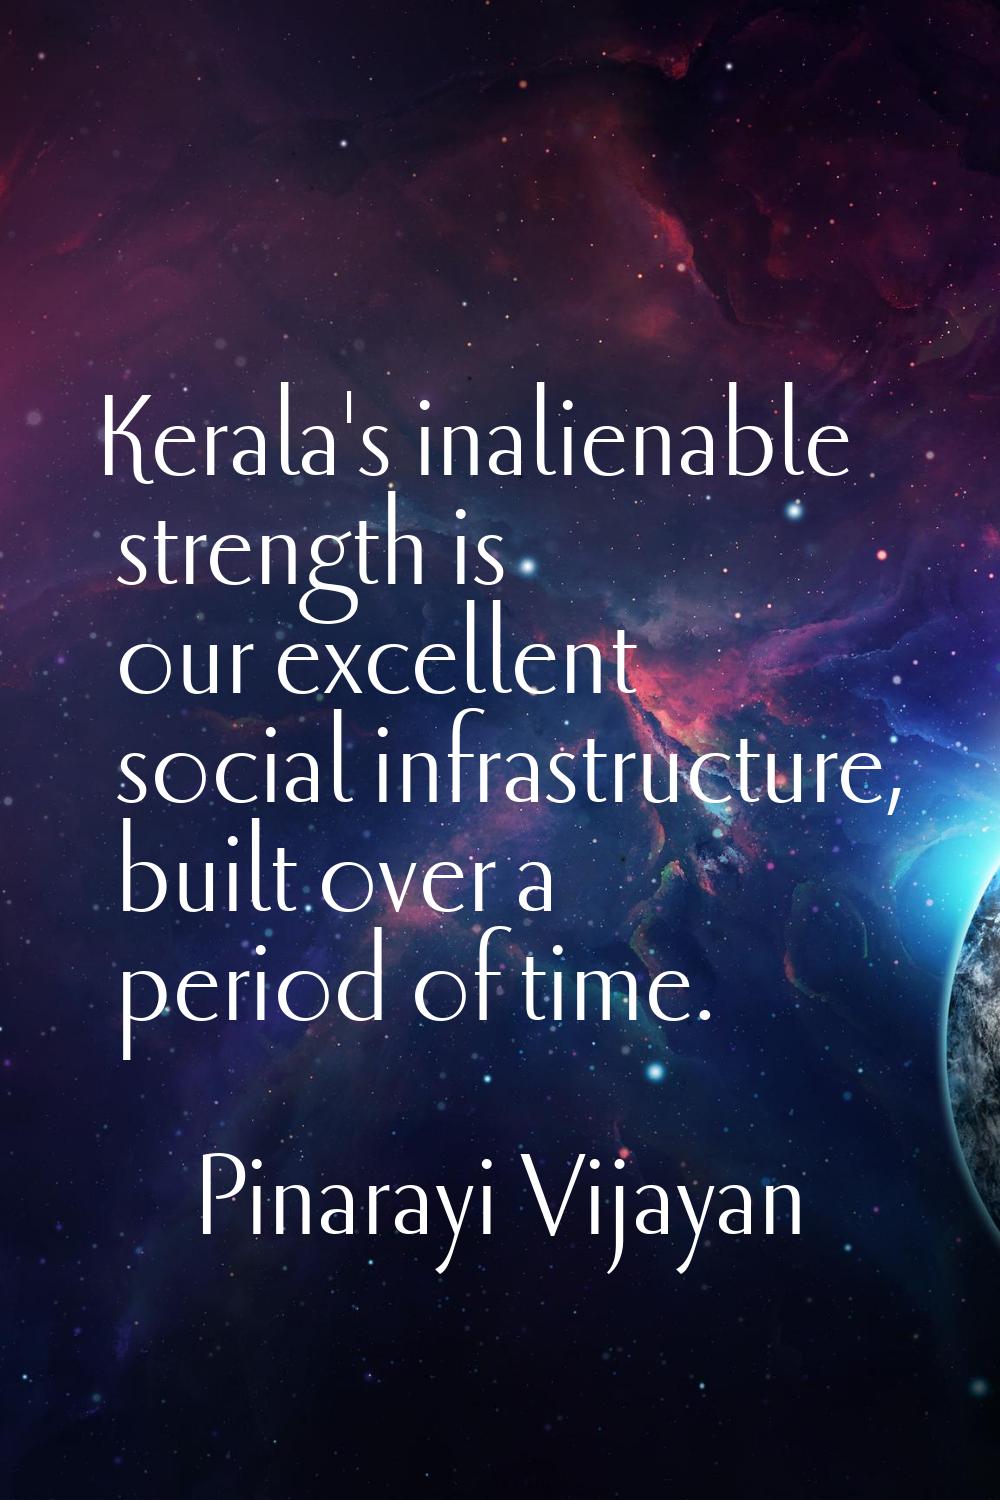 Kerala's inalienable strength is our excellent social infrastructure, built over a period of time.